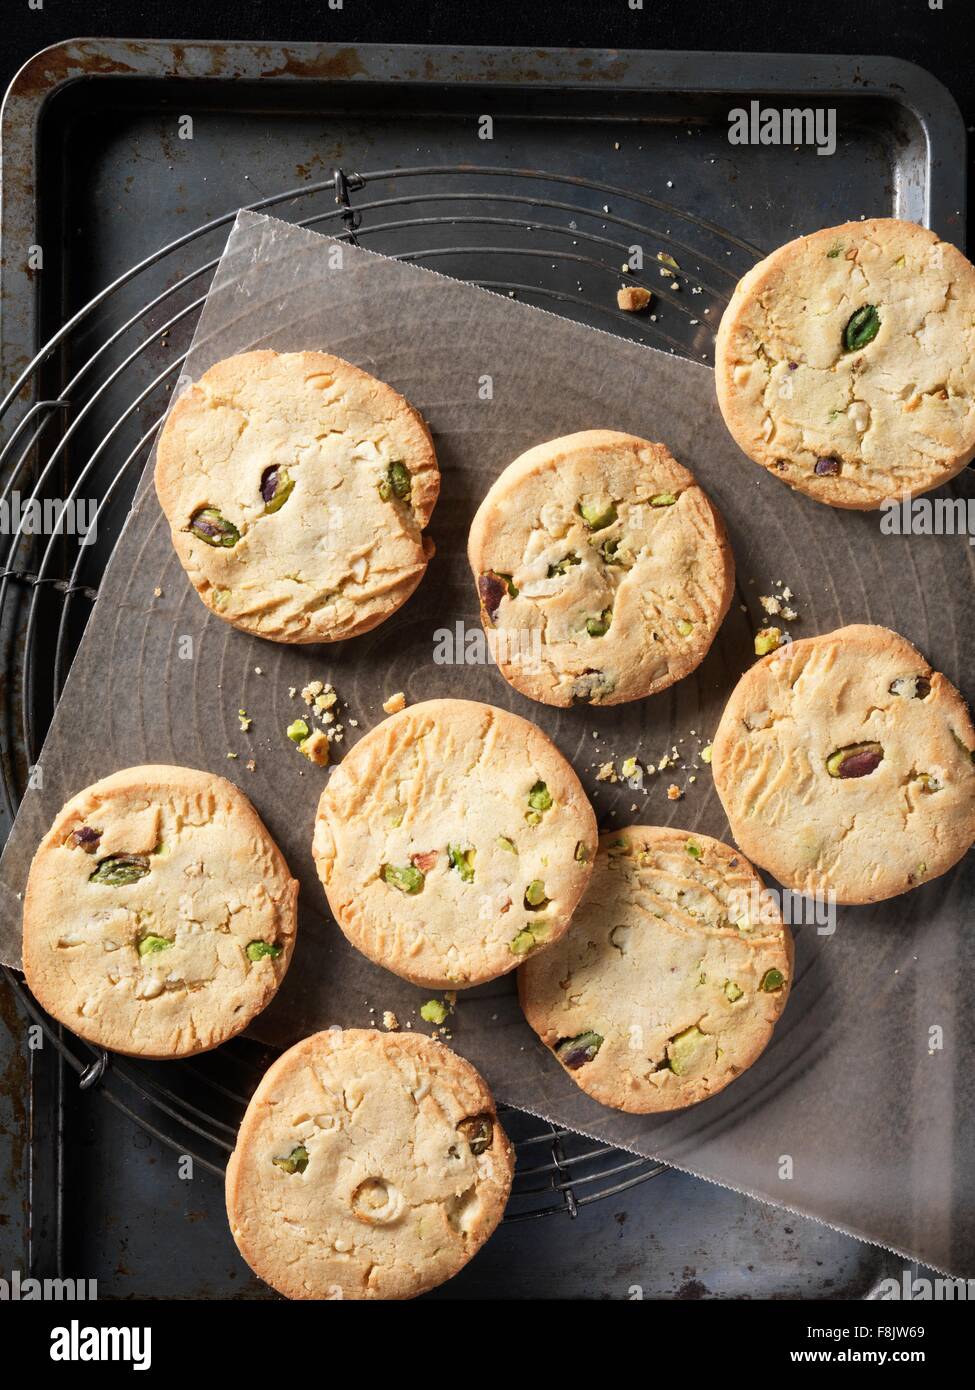 Overhead view of  crunchy pistachio and almond cookies on baking tray Stock Photo